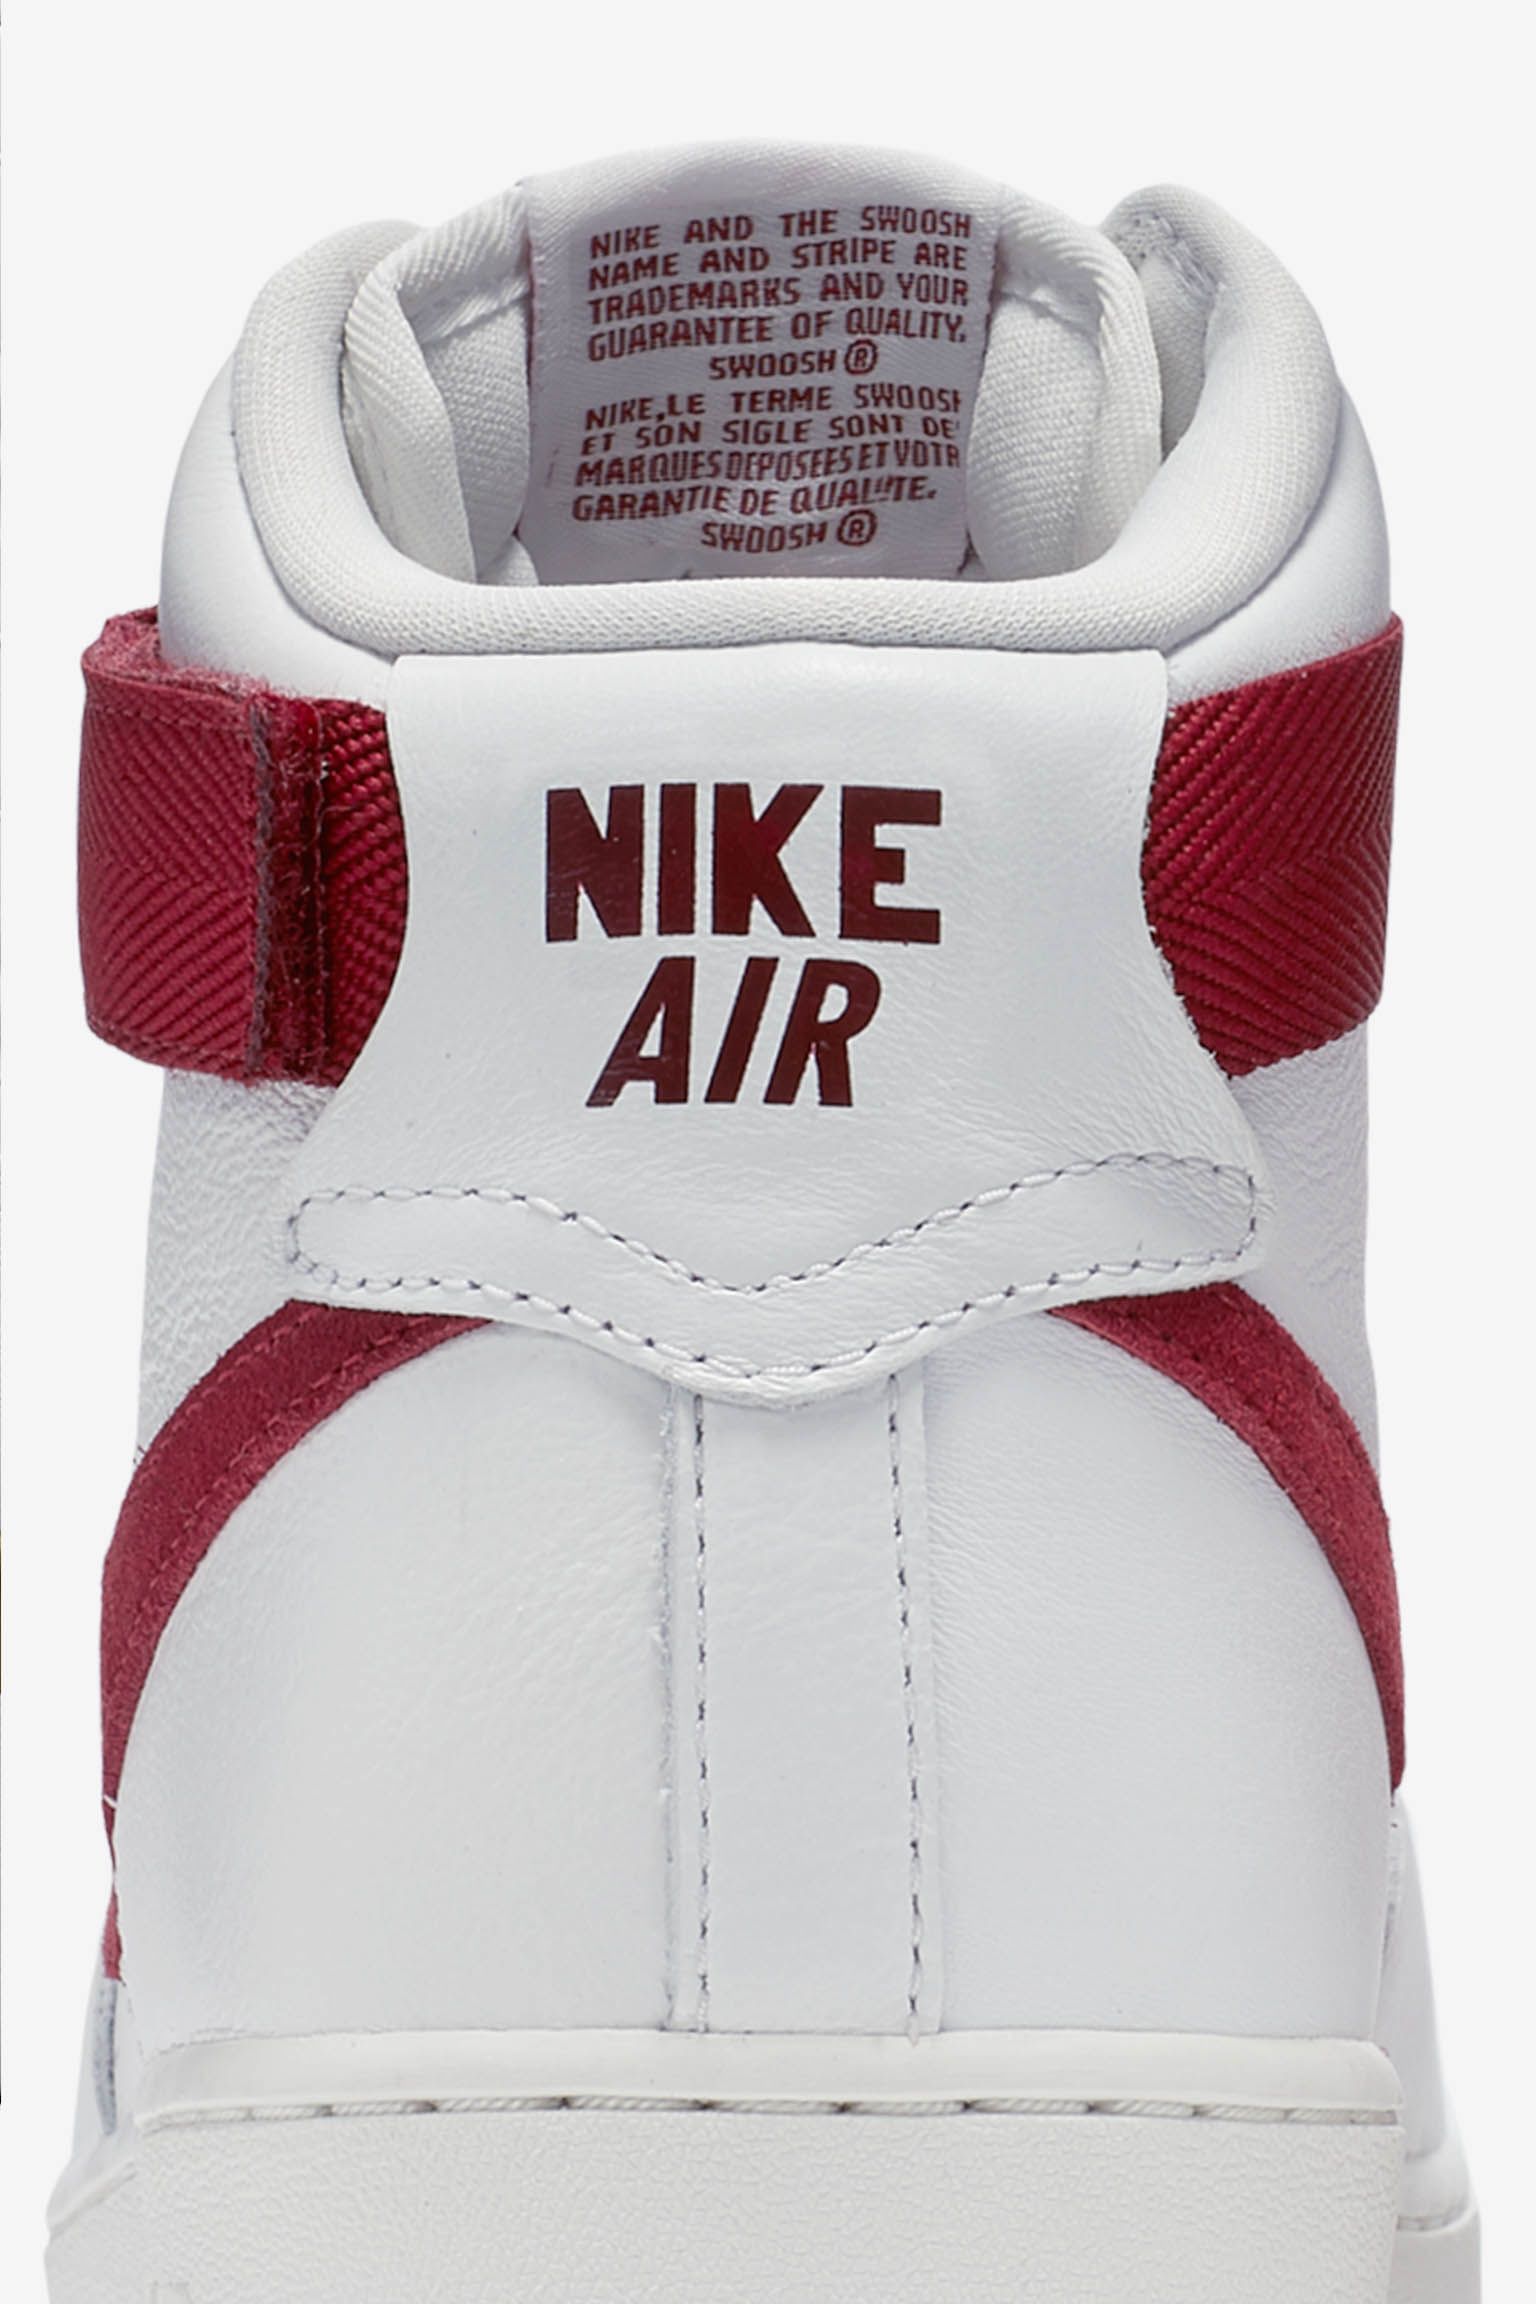 red and white nike high tops